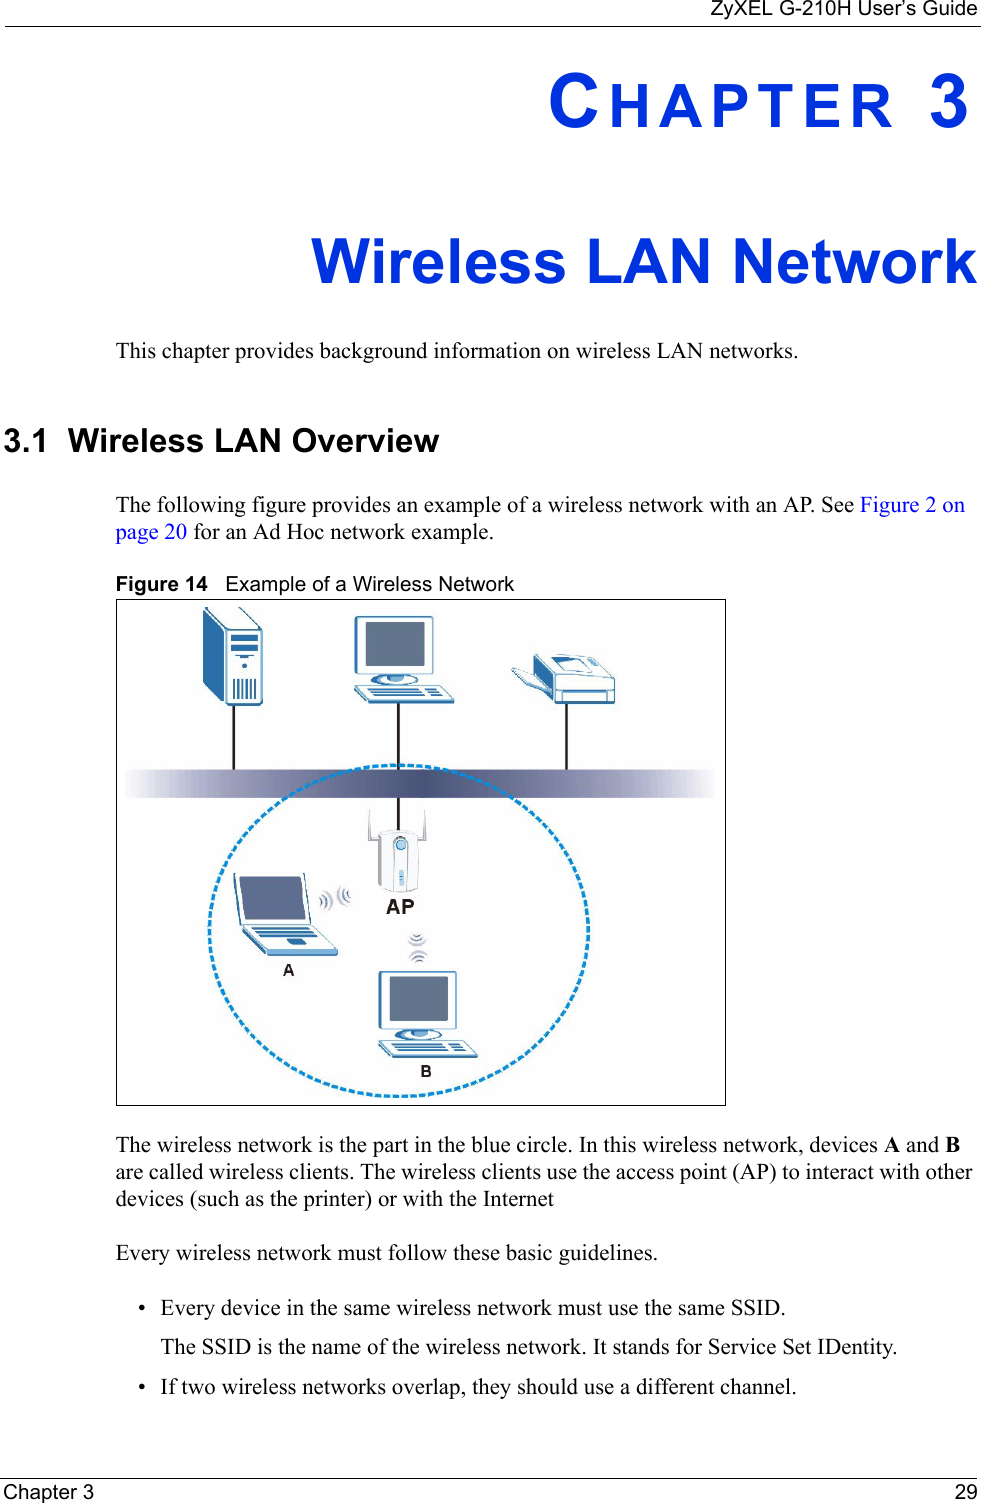 ZyXEL G-210H User’s GuideChapter 3 29CHAPTER 3Wireless LAN NetworkThis chapter provides background information on wireless LAN networks.3.1  Wireless LAN Overview The following figure provides an example of a wireless network with an AP. See Figure 2 on page 20 for an Ad Hoc network example.Figure 14   Example of a Wireless NetworkThe wireless network is the part in the blue circle. In this wireless network, devices A and B are called wireless clients. The wireless clients use the access point (AP) to interact with other devices (such as the printer) or with the InternetEvery wireless network must follow these basic guidelines.• Every device in the same wireless network must use the same SSID.The SSID is the name of the wireless network. It stands for Service Set IDentity.• If two wireless networks overlap, they should use a different channel.